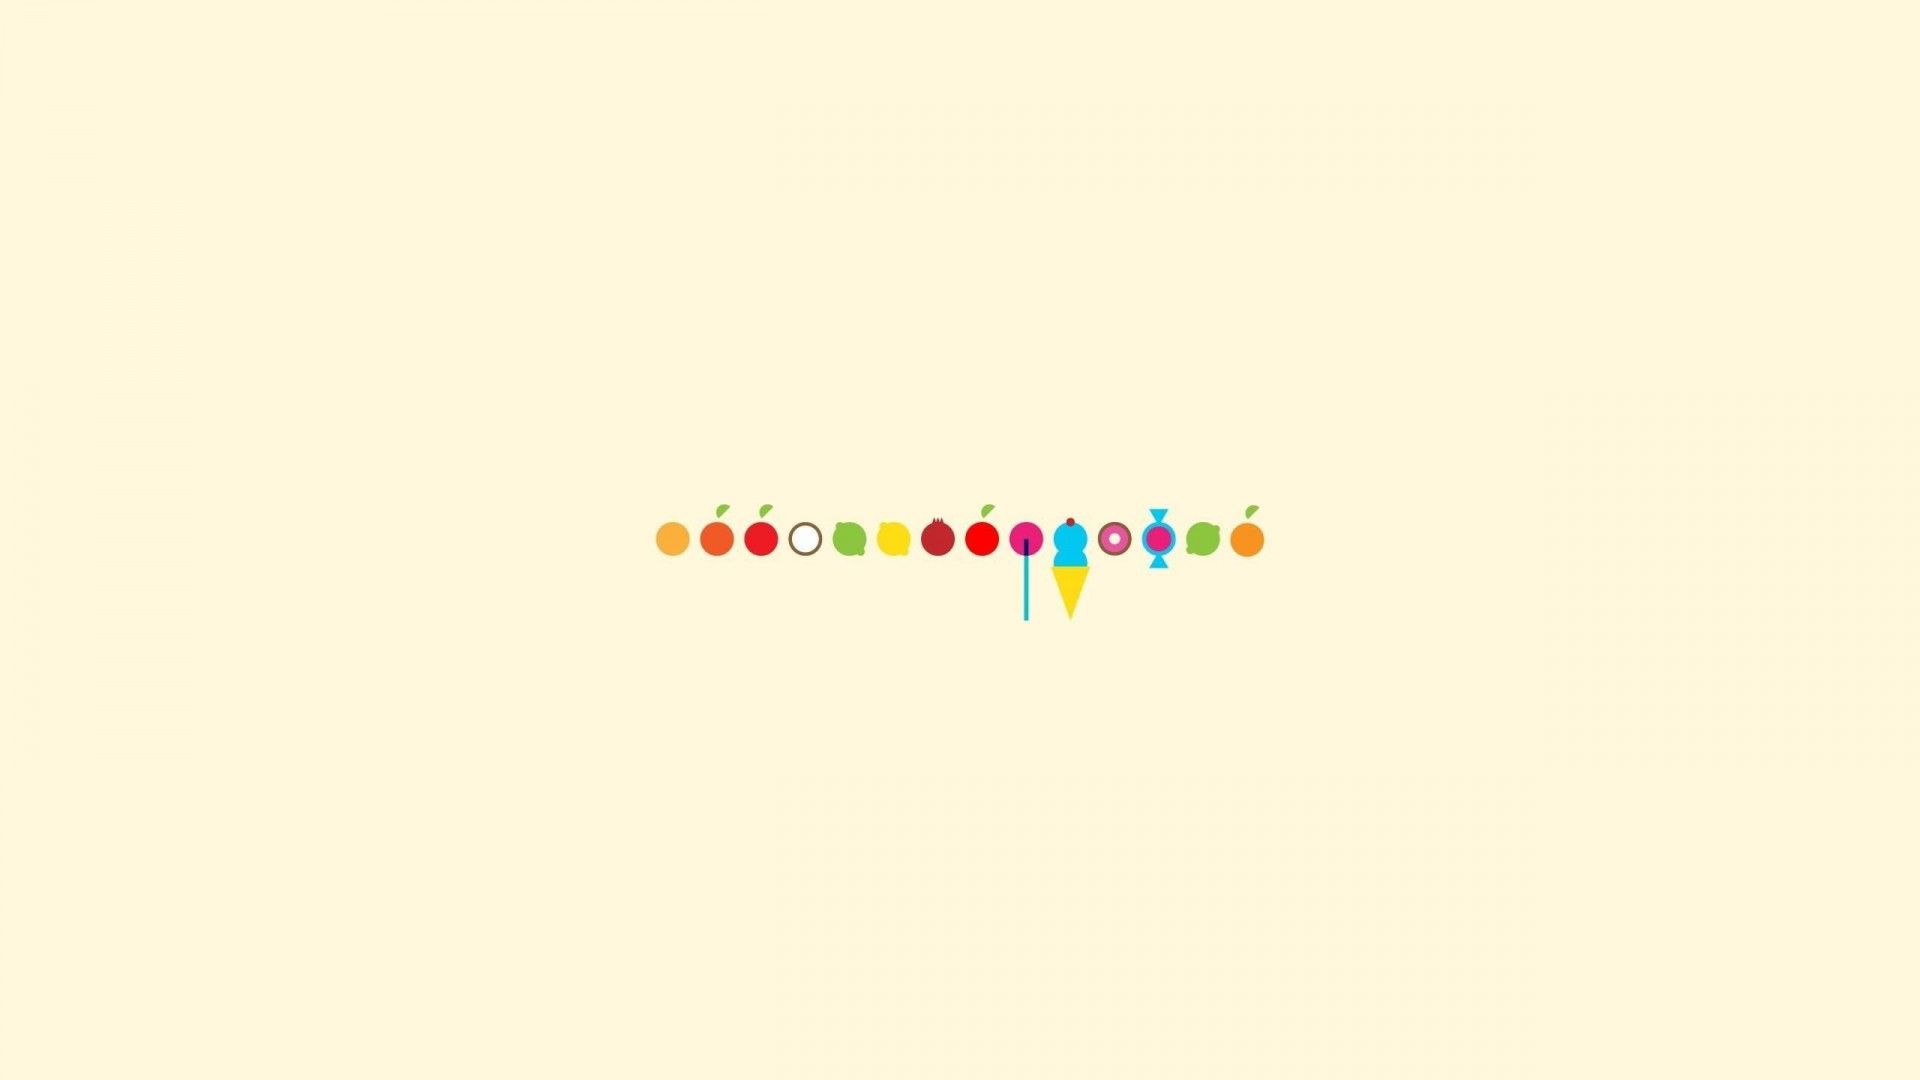 A simple wallpaper with a row of colorful dots - Minimalist, candy